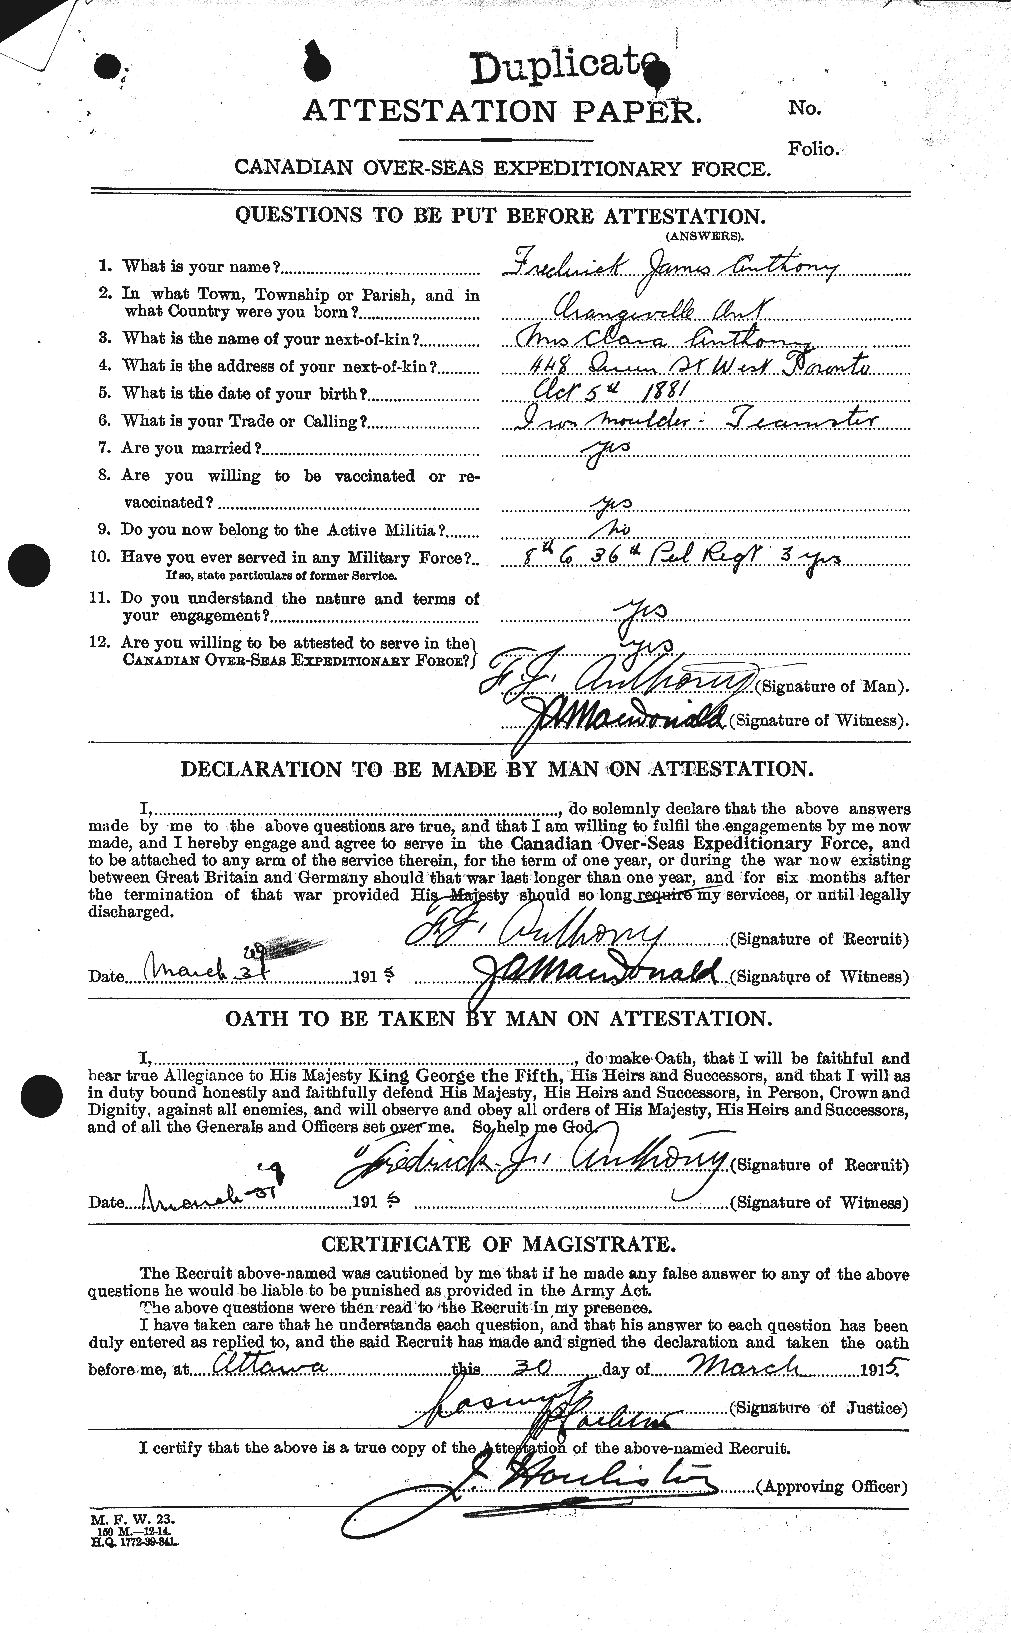 Personnel Records of the First World War - CEF 212213a